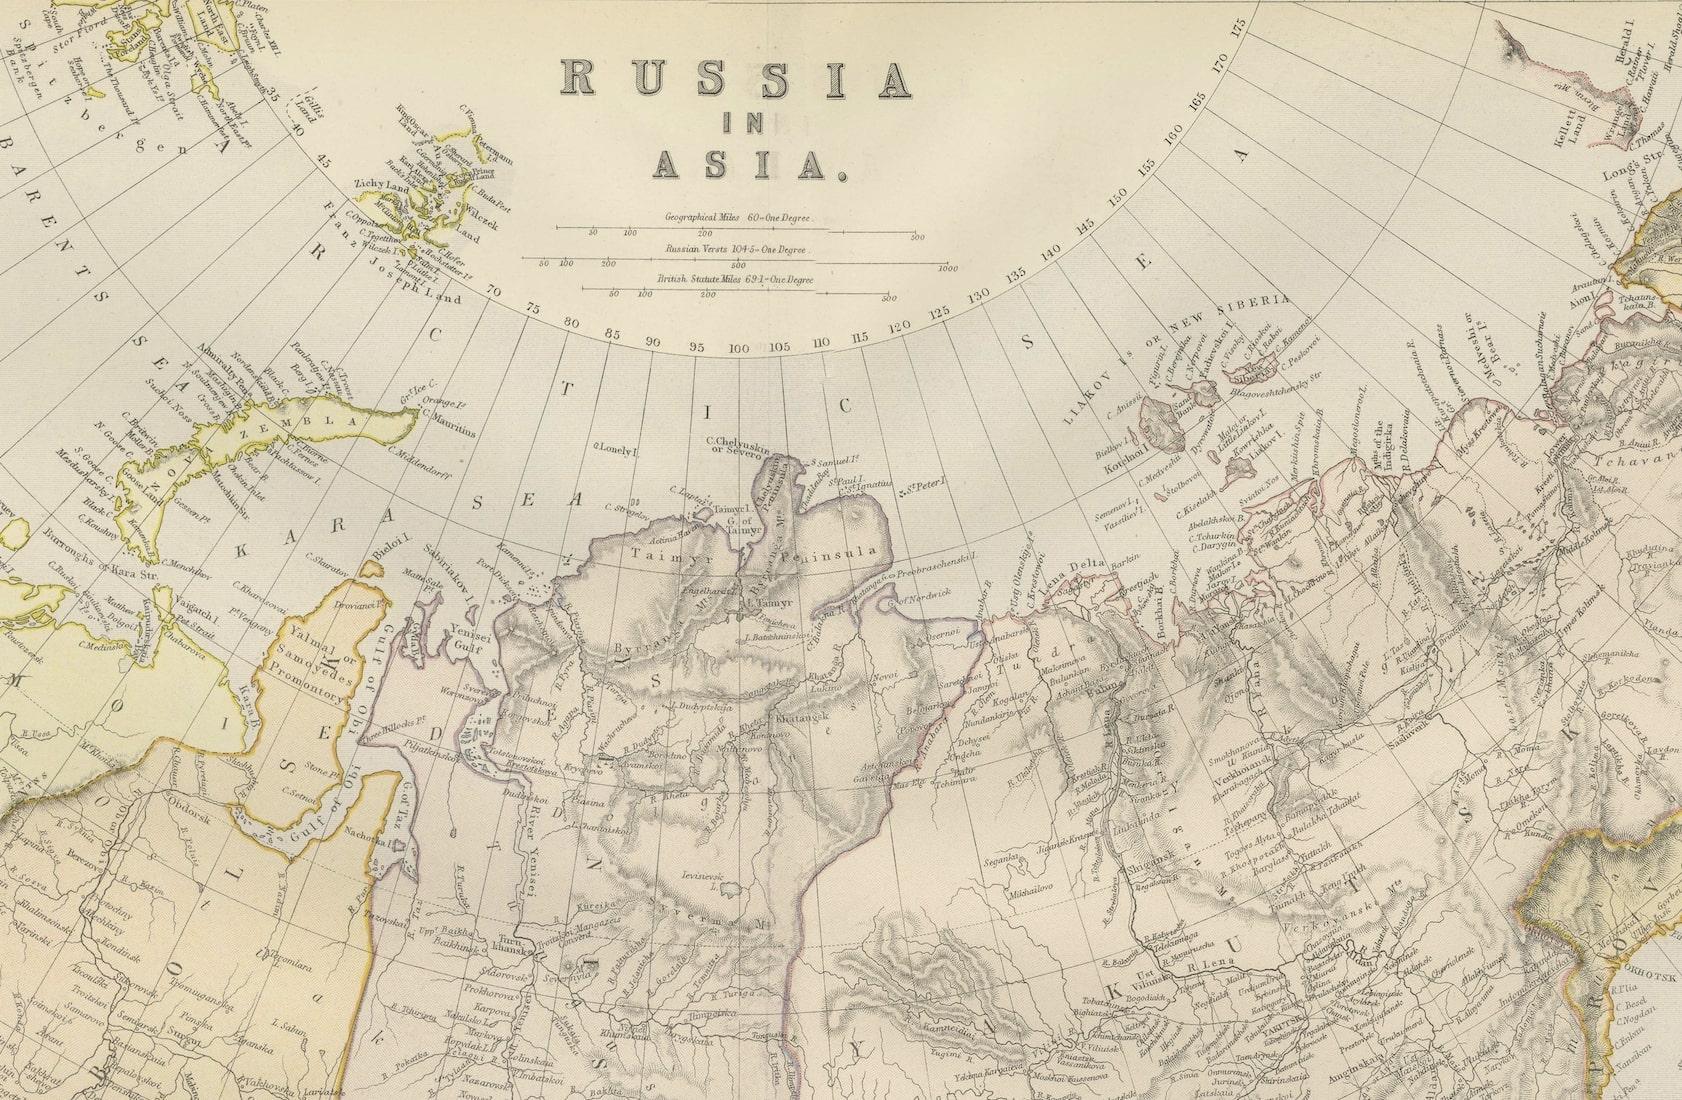 This exquisite map, hailing from the year 1882, is a remarkable historical cartographic artifact, which was included as part of the prestigious 'Comprehensive Atlas and Geography of the World'. Published by the esteemed Blackie and Son, this map